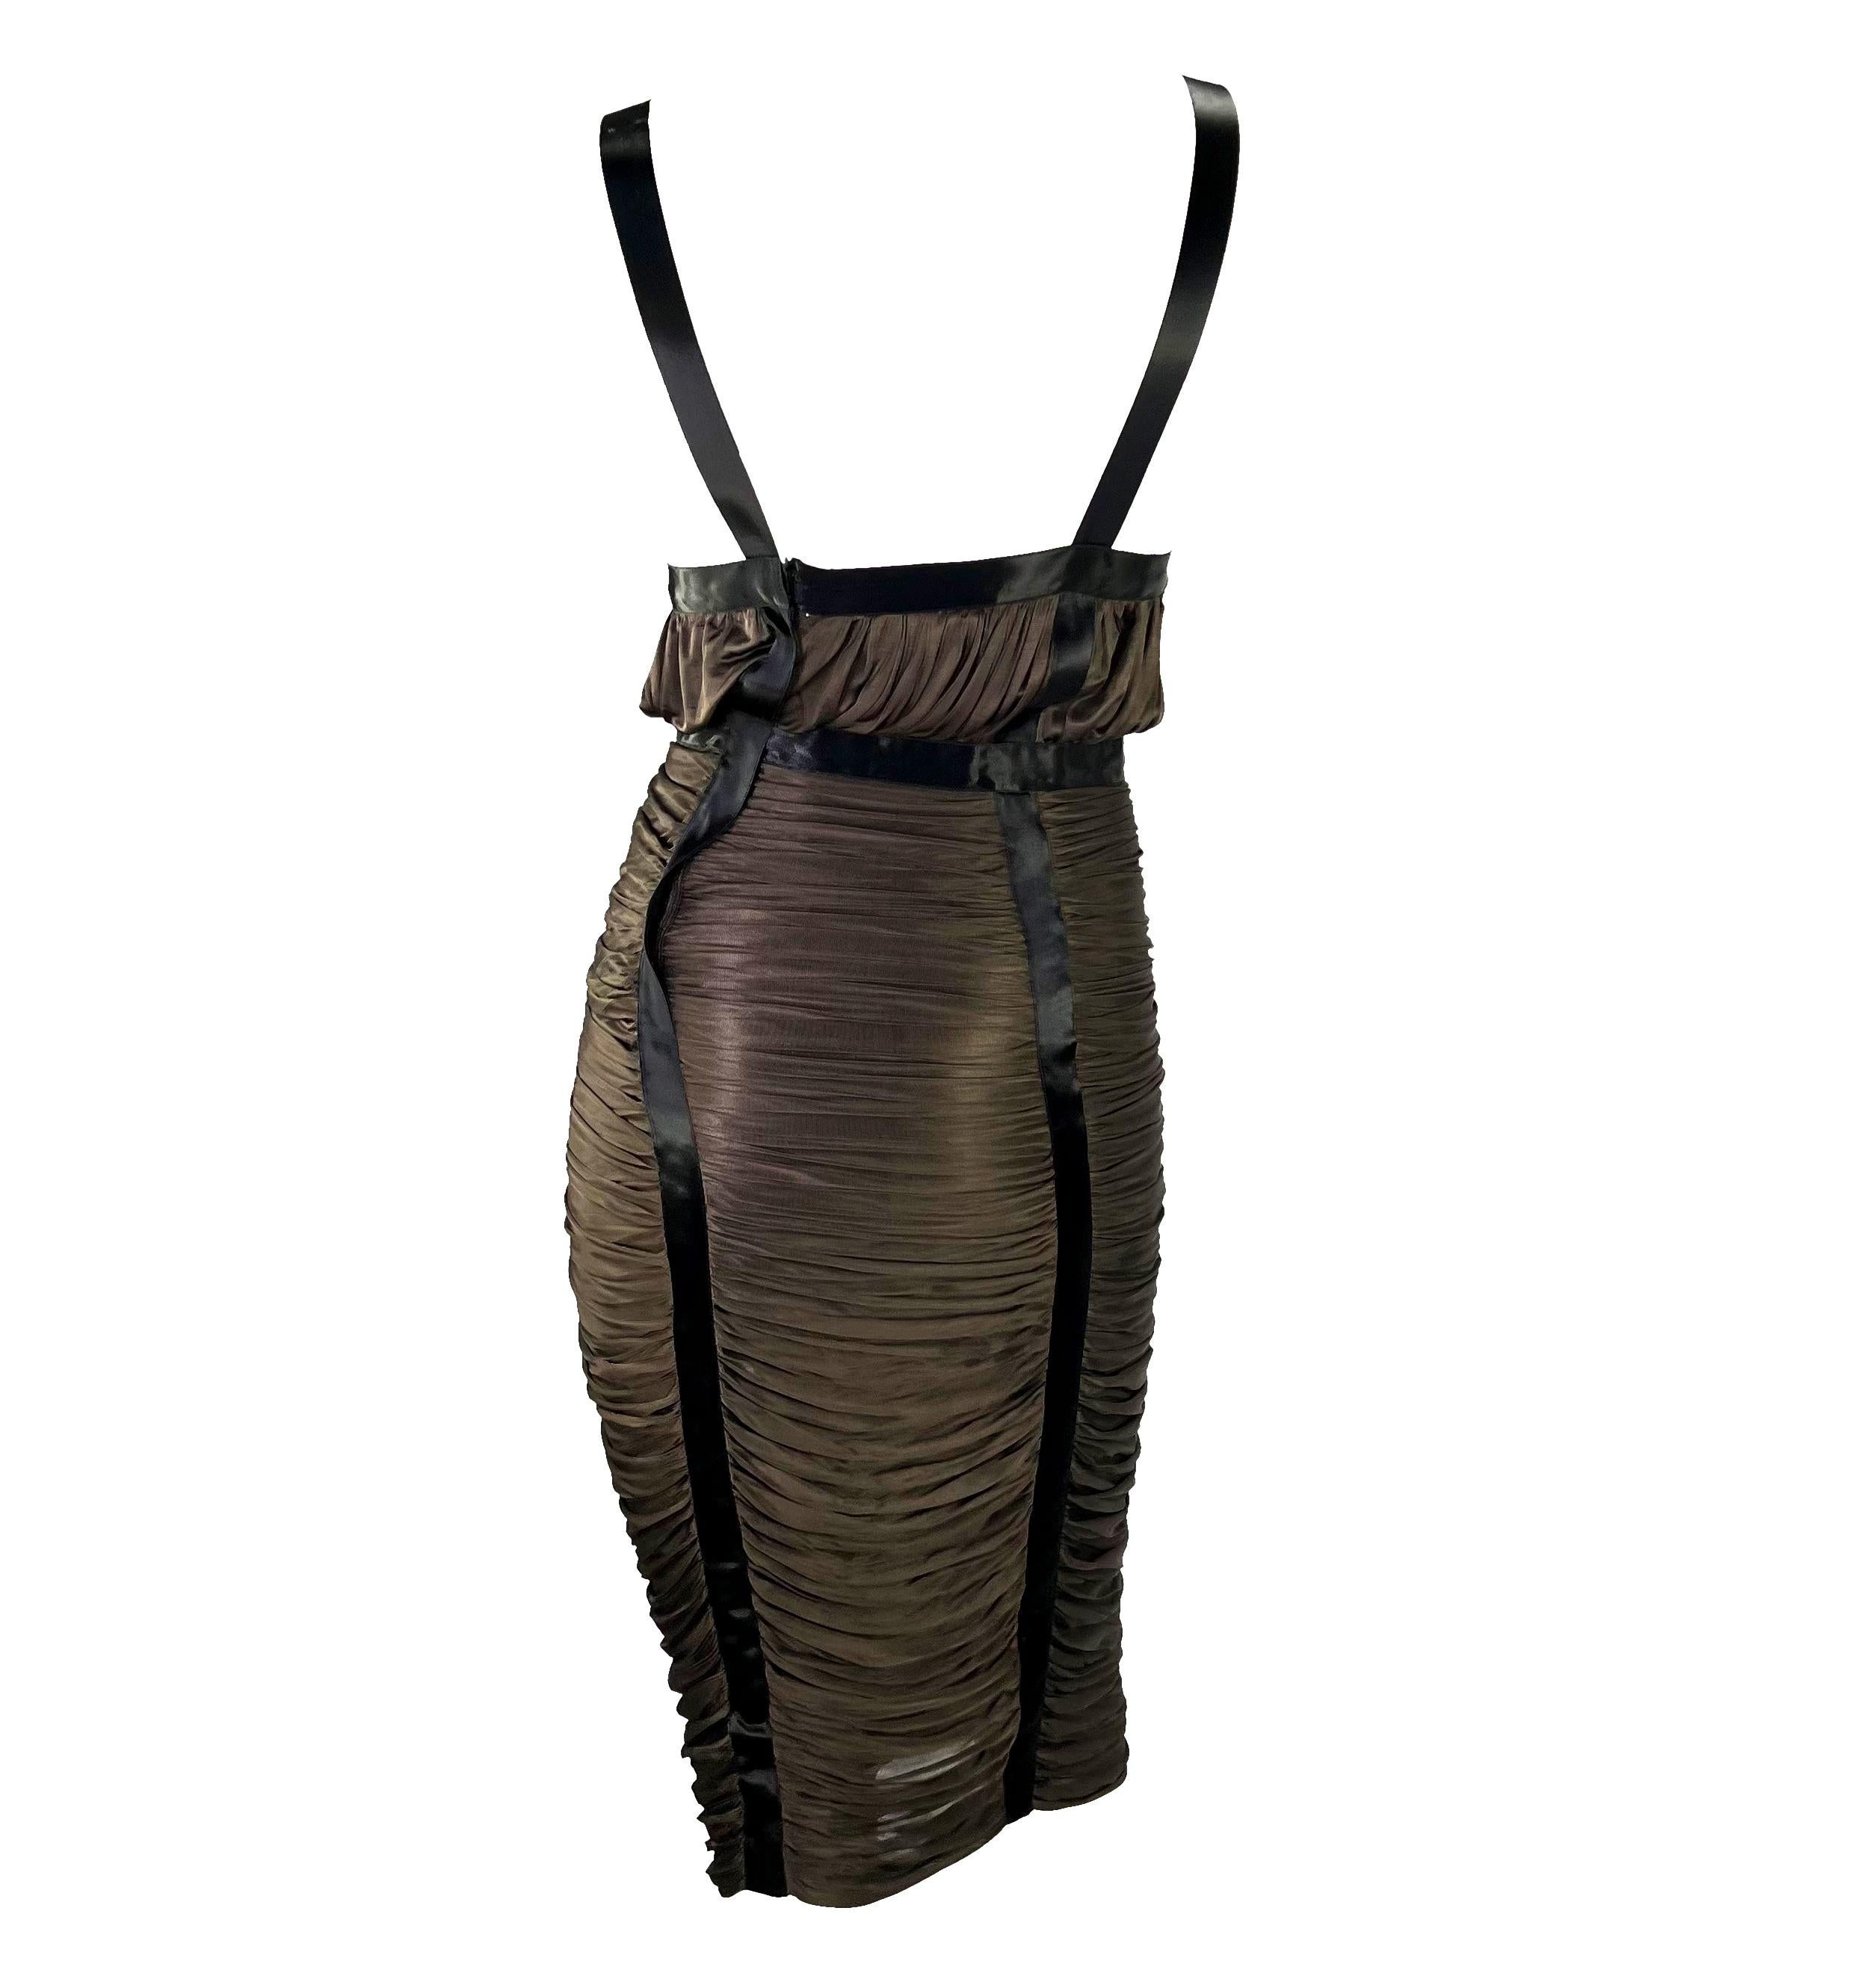 S/S 2003 Yves Saint Laurent by Tom Ford Ruched Brown Stretch Viscose Dress In Good Condition For Sale In West Hollywood, CA